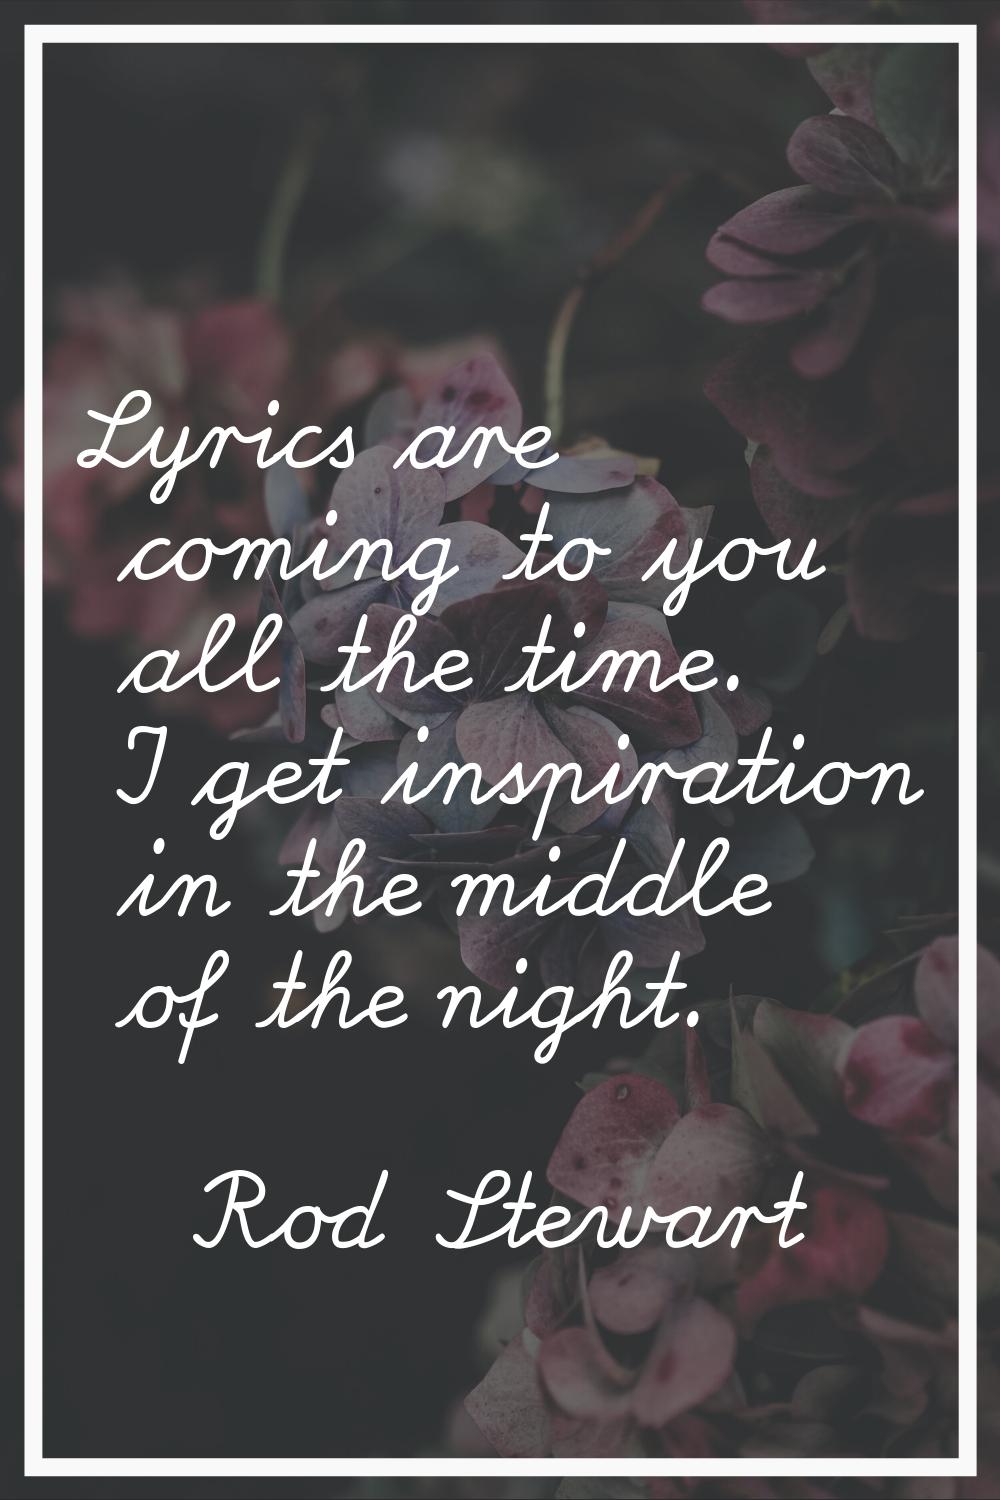 Lyrics are coming to you all the time. I get inspiration in the middle of the night.